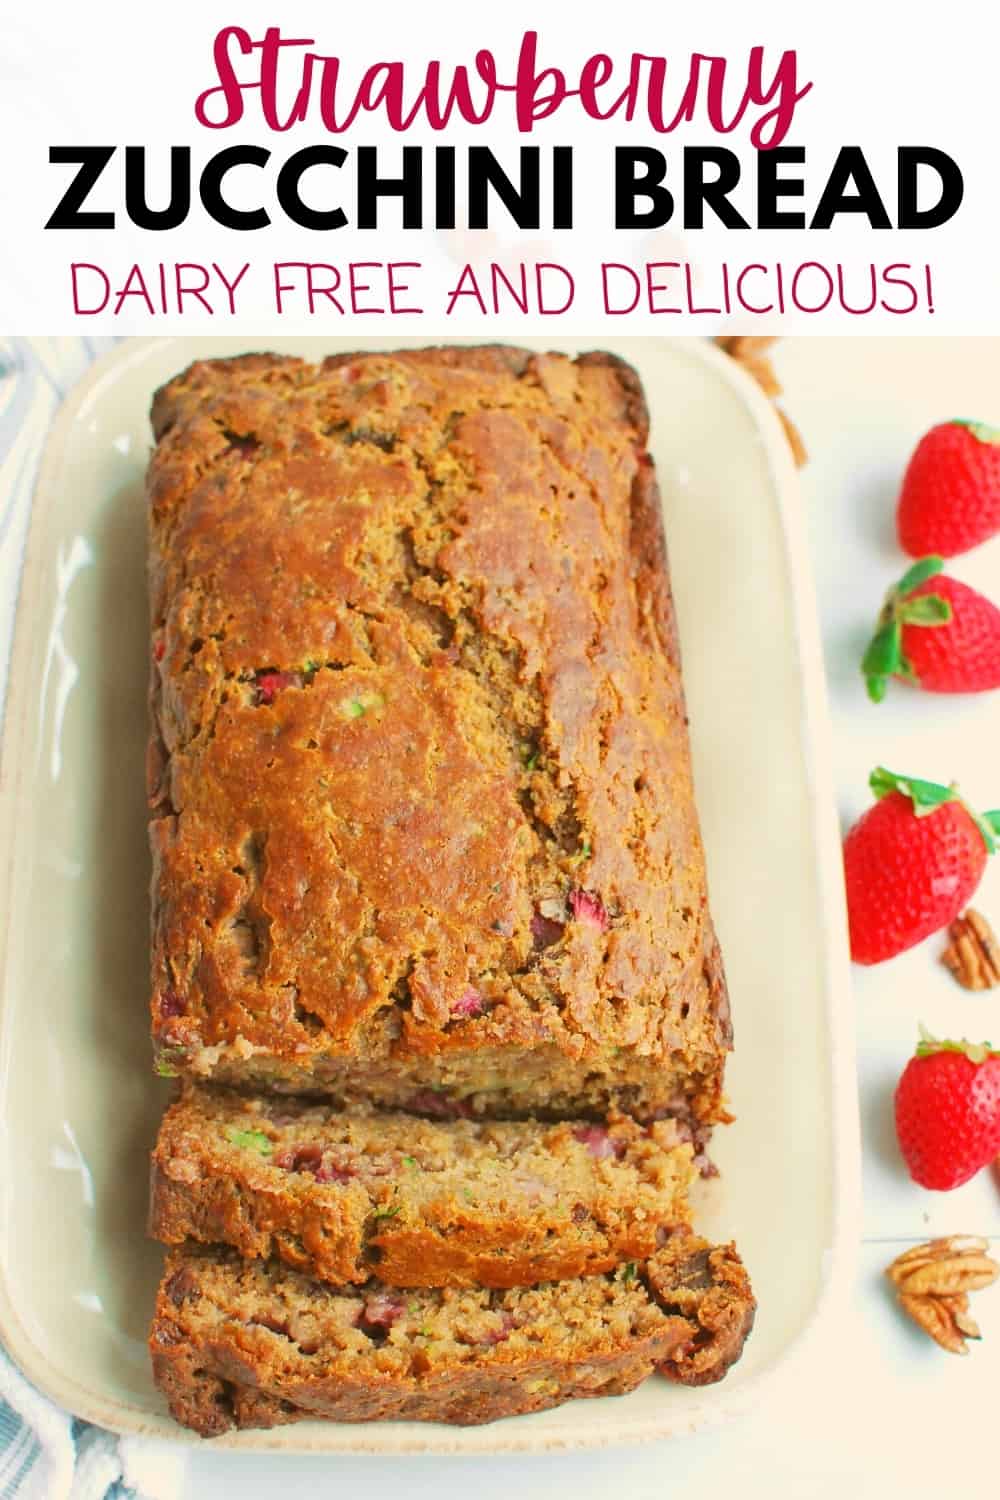 A loaf of strawberry zucchini bread on a rectangular plate next to some fresh strawberries.